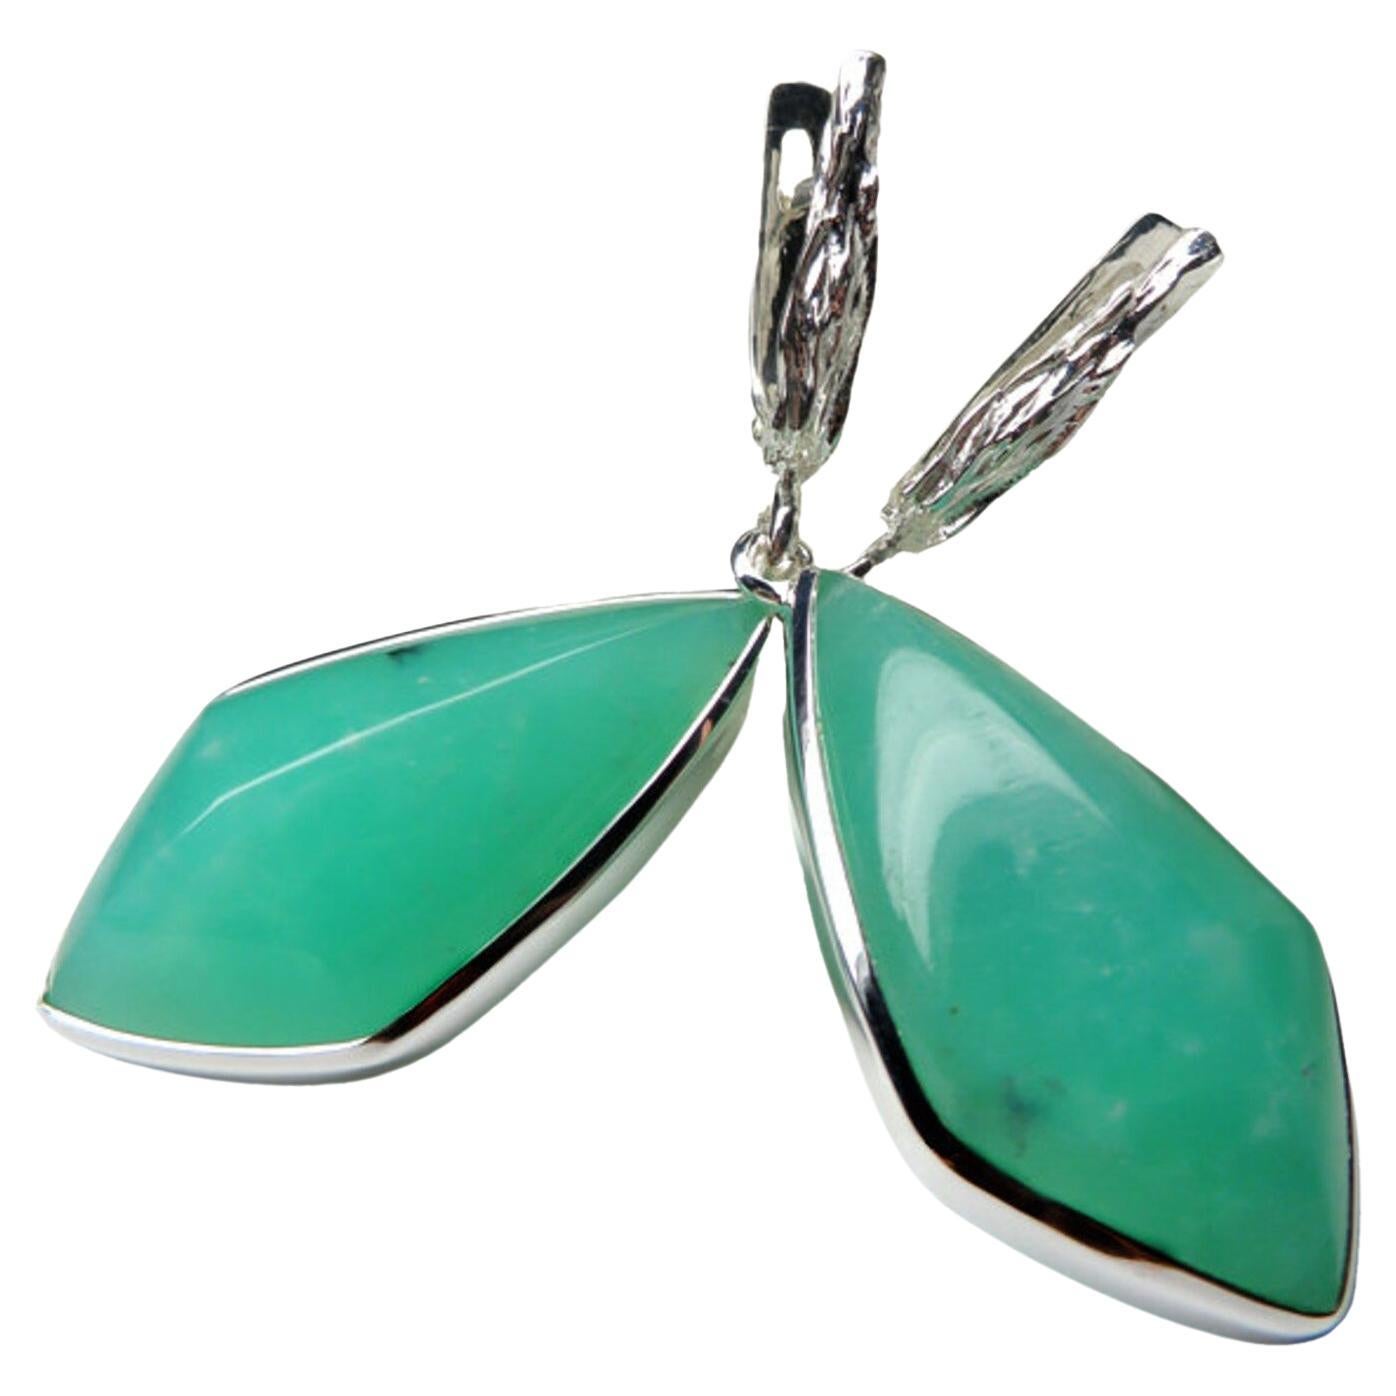 Big Chrysoprase Earrings silver Kite Shaped Luminous Mint Green Natural Gemstone For Sale